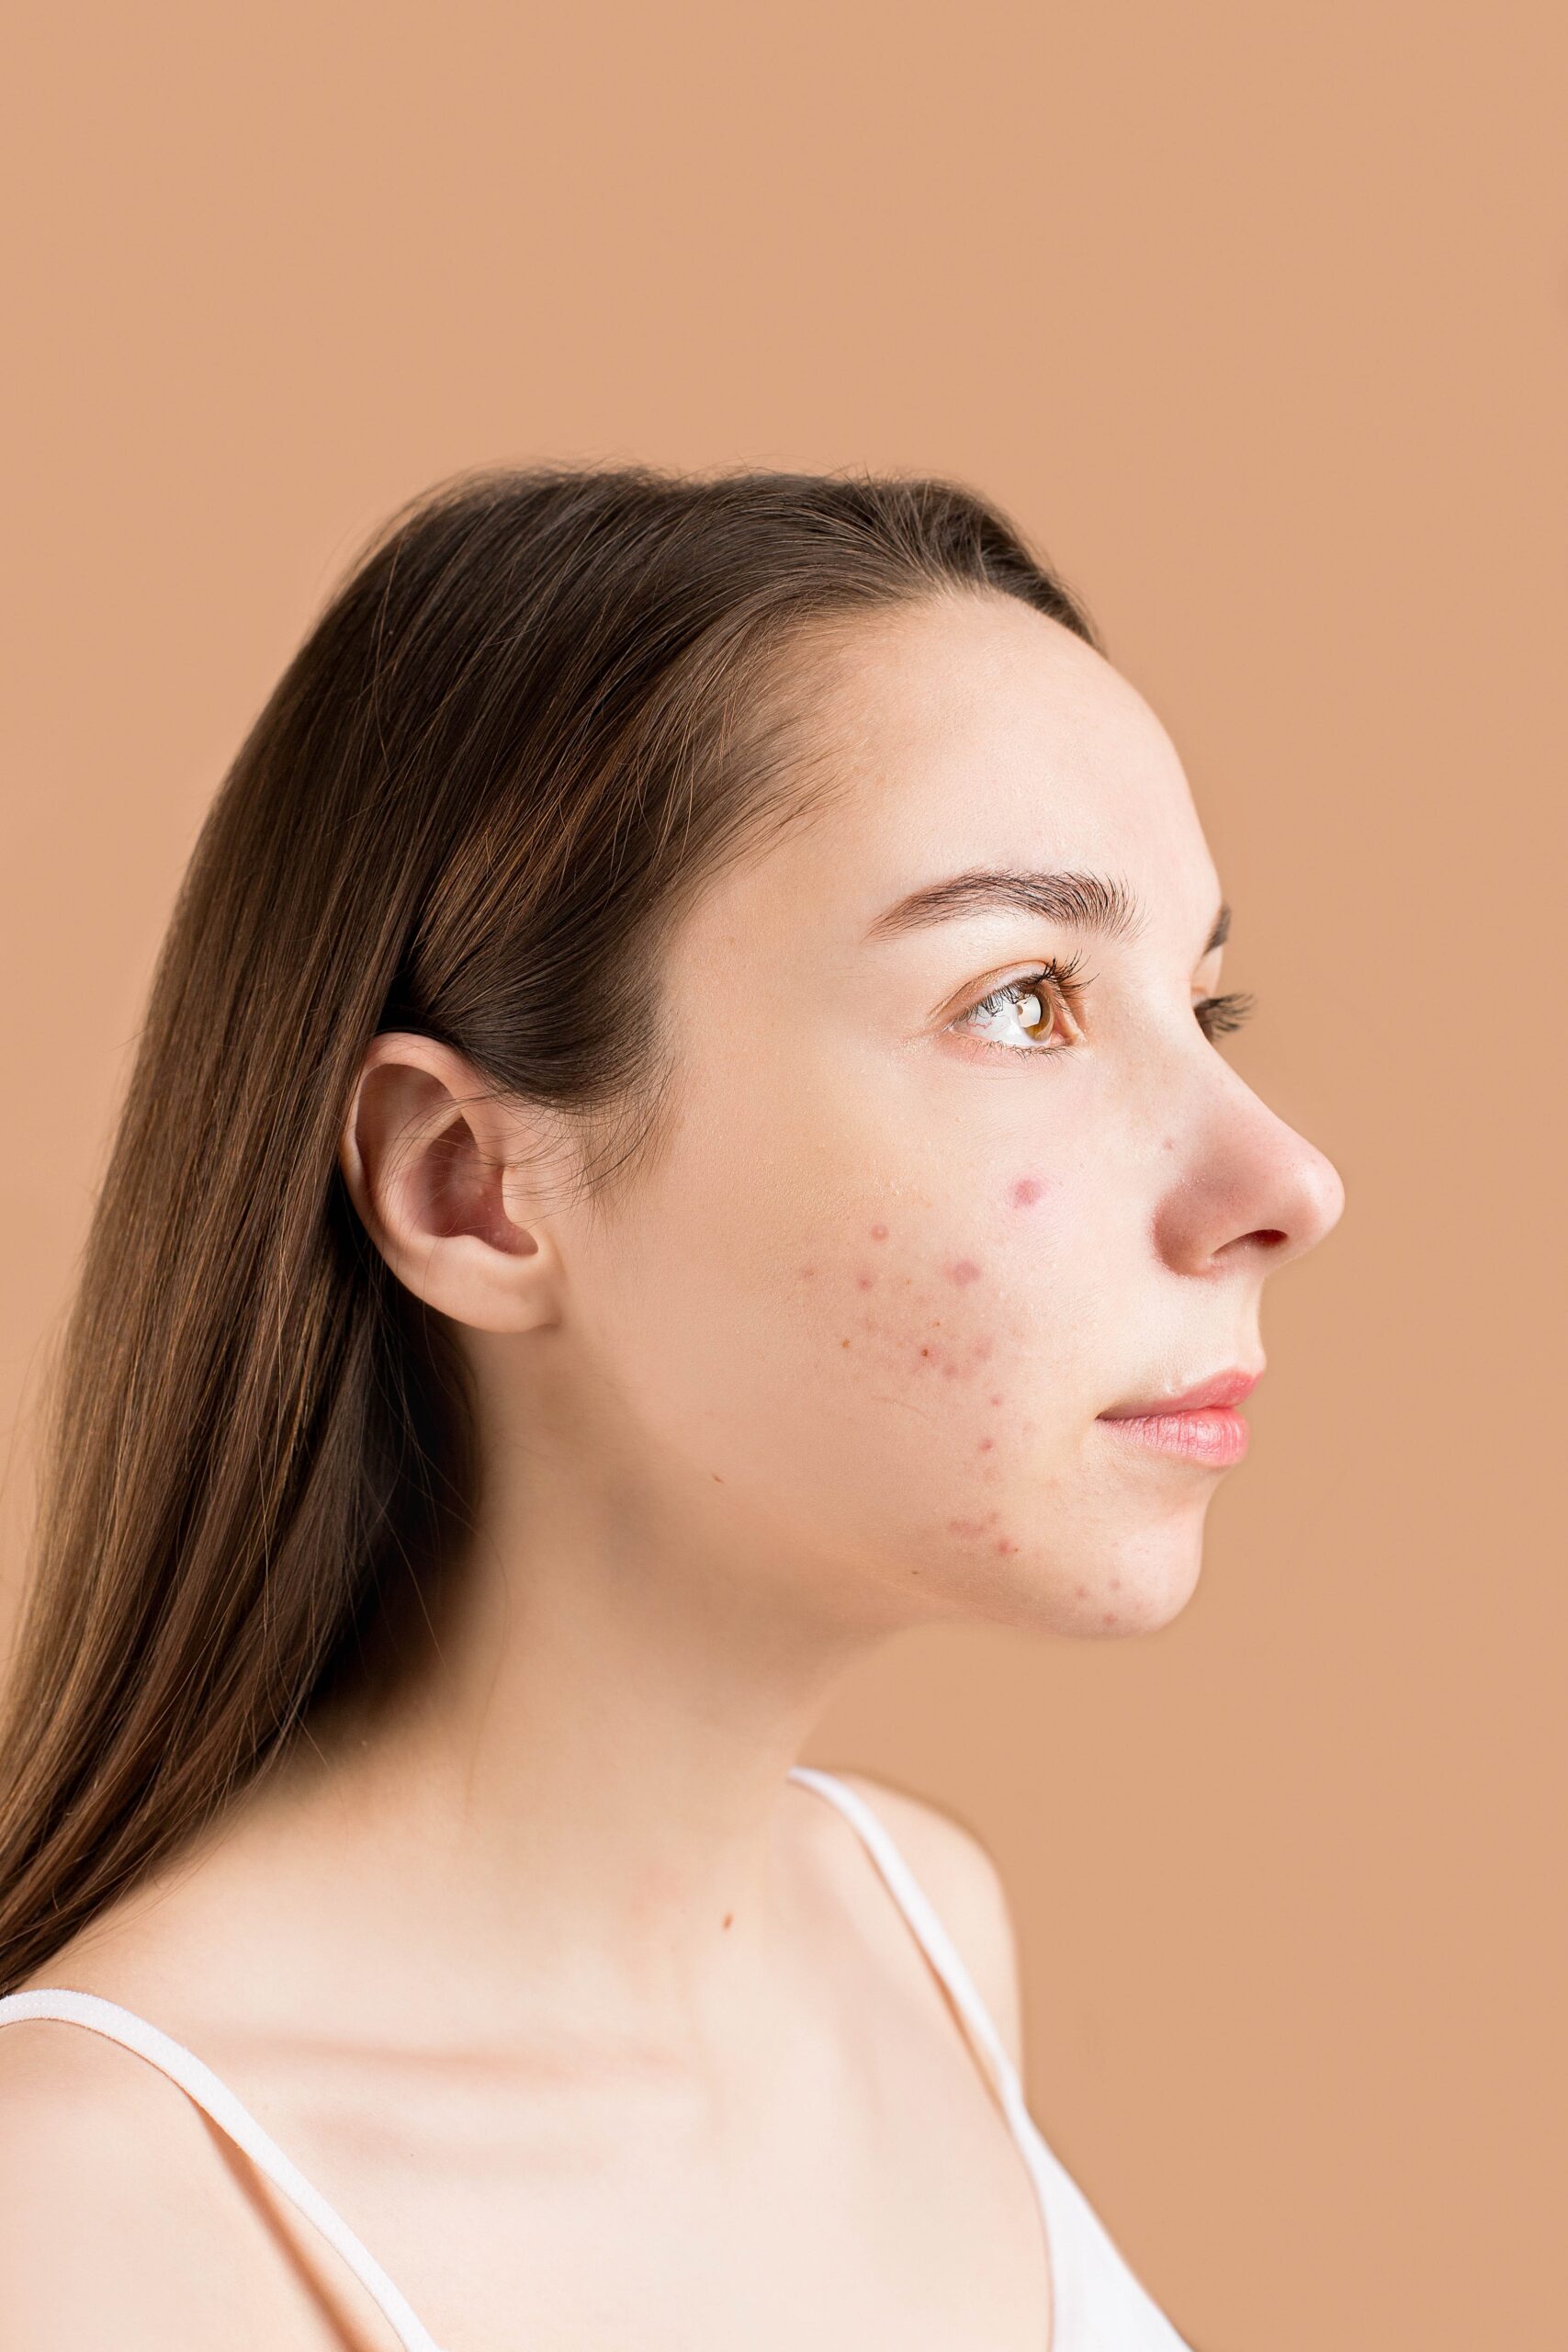 Salicylic Acid The Go-To Solution for Acne-Prone Skin